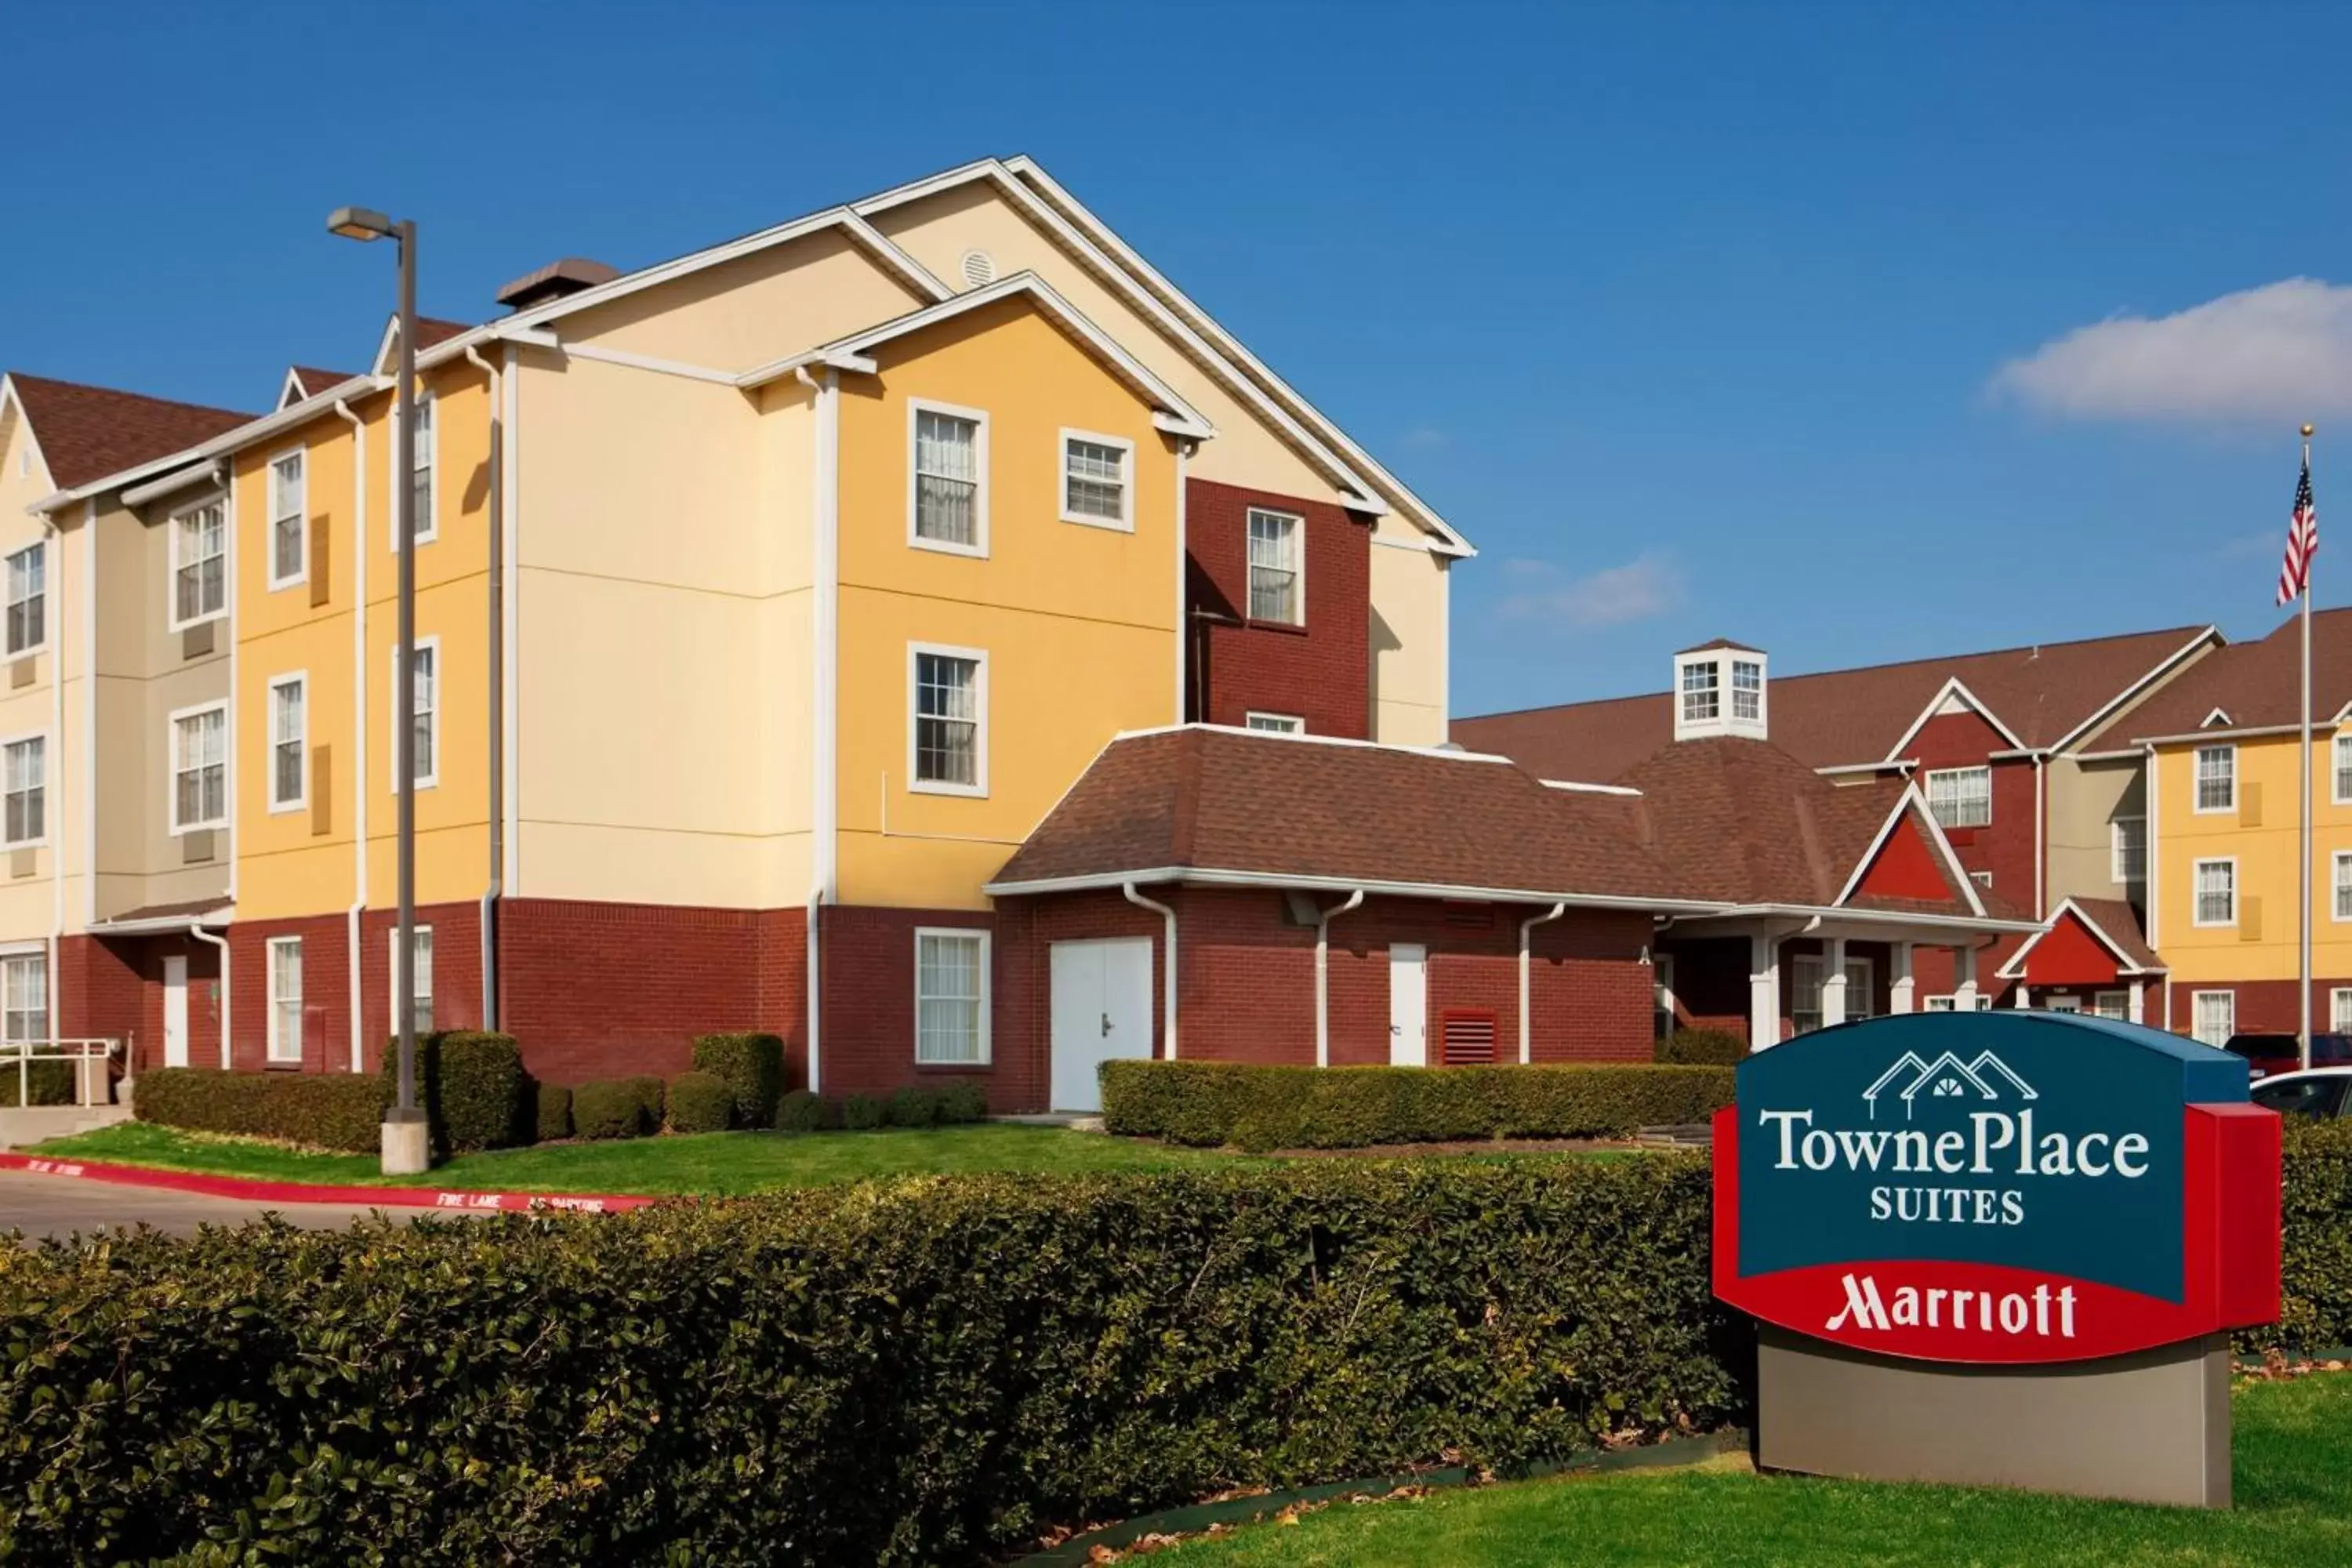 Property Building in TownePlace Suites Fort Worth Southwest TCU Area